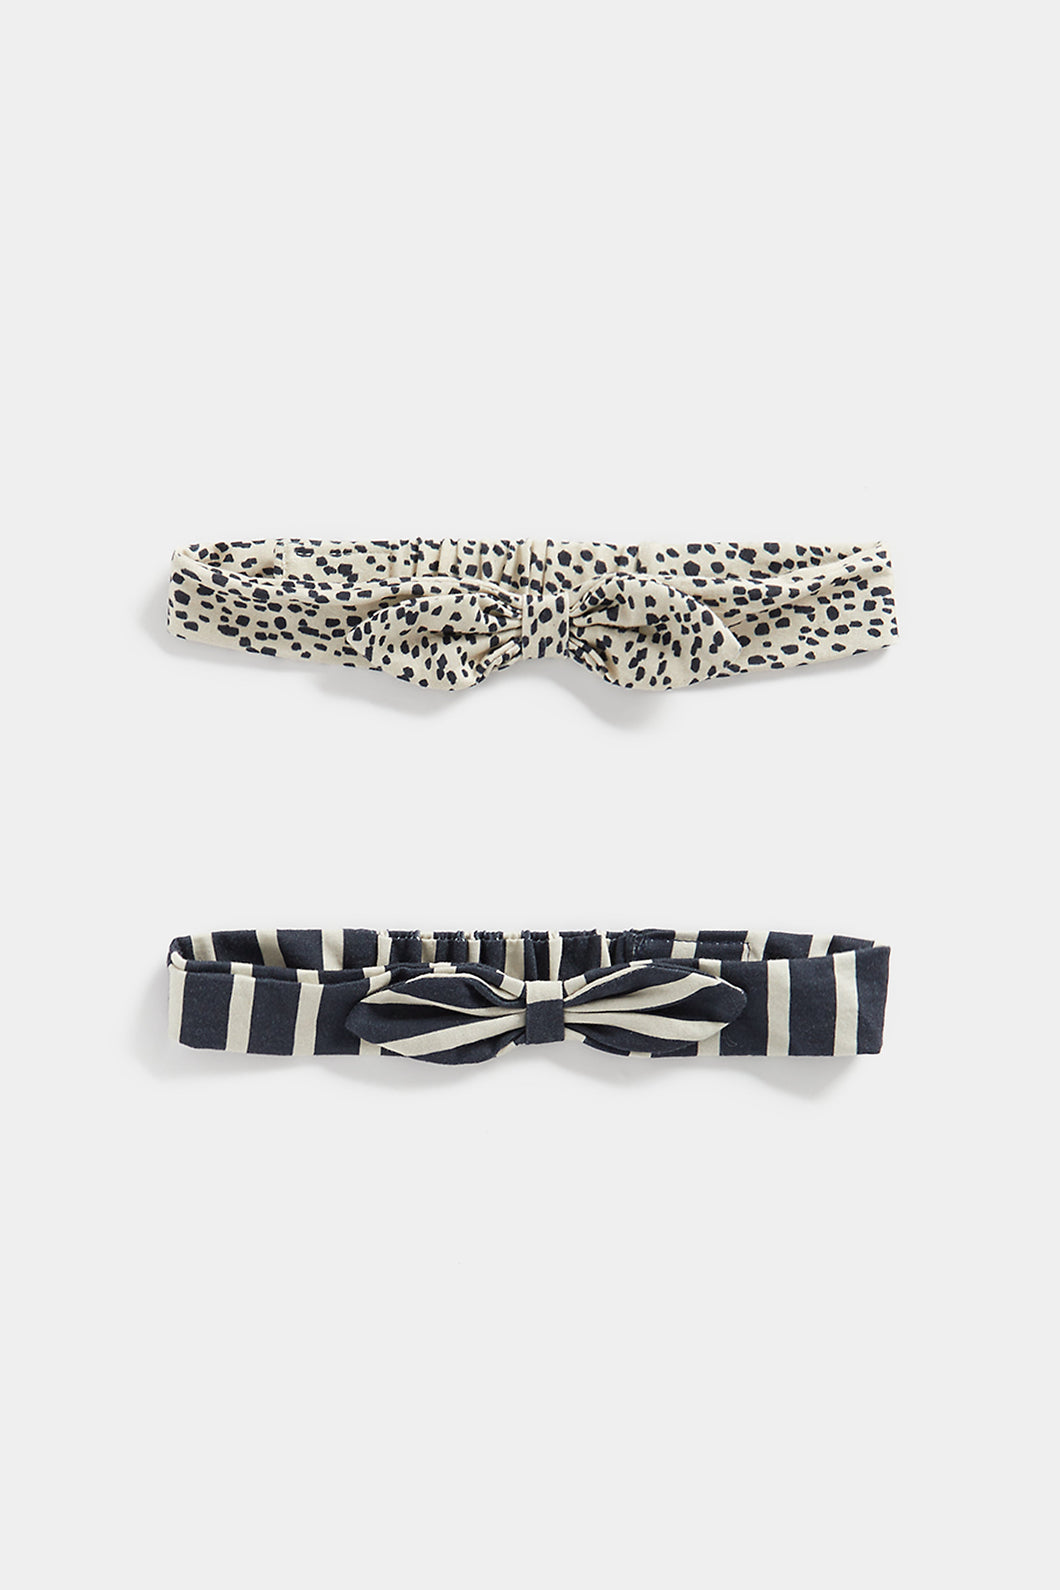 Mothercare Headbands - 2 Pack